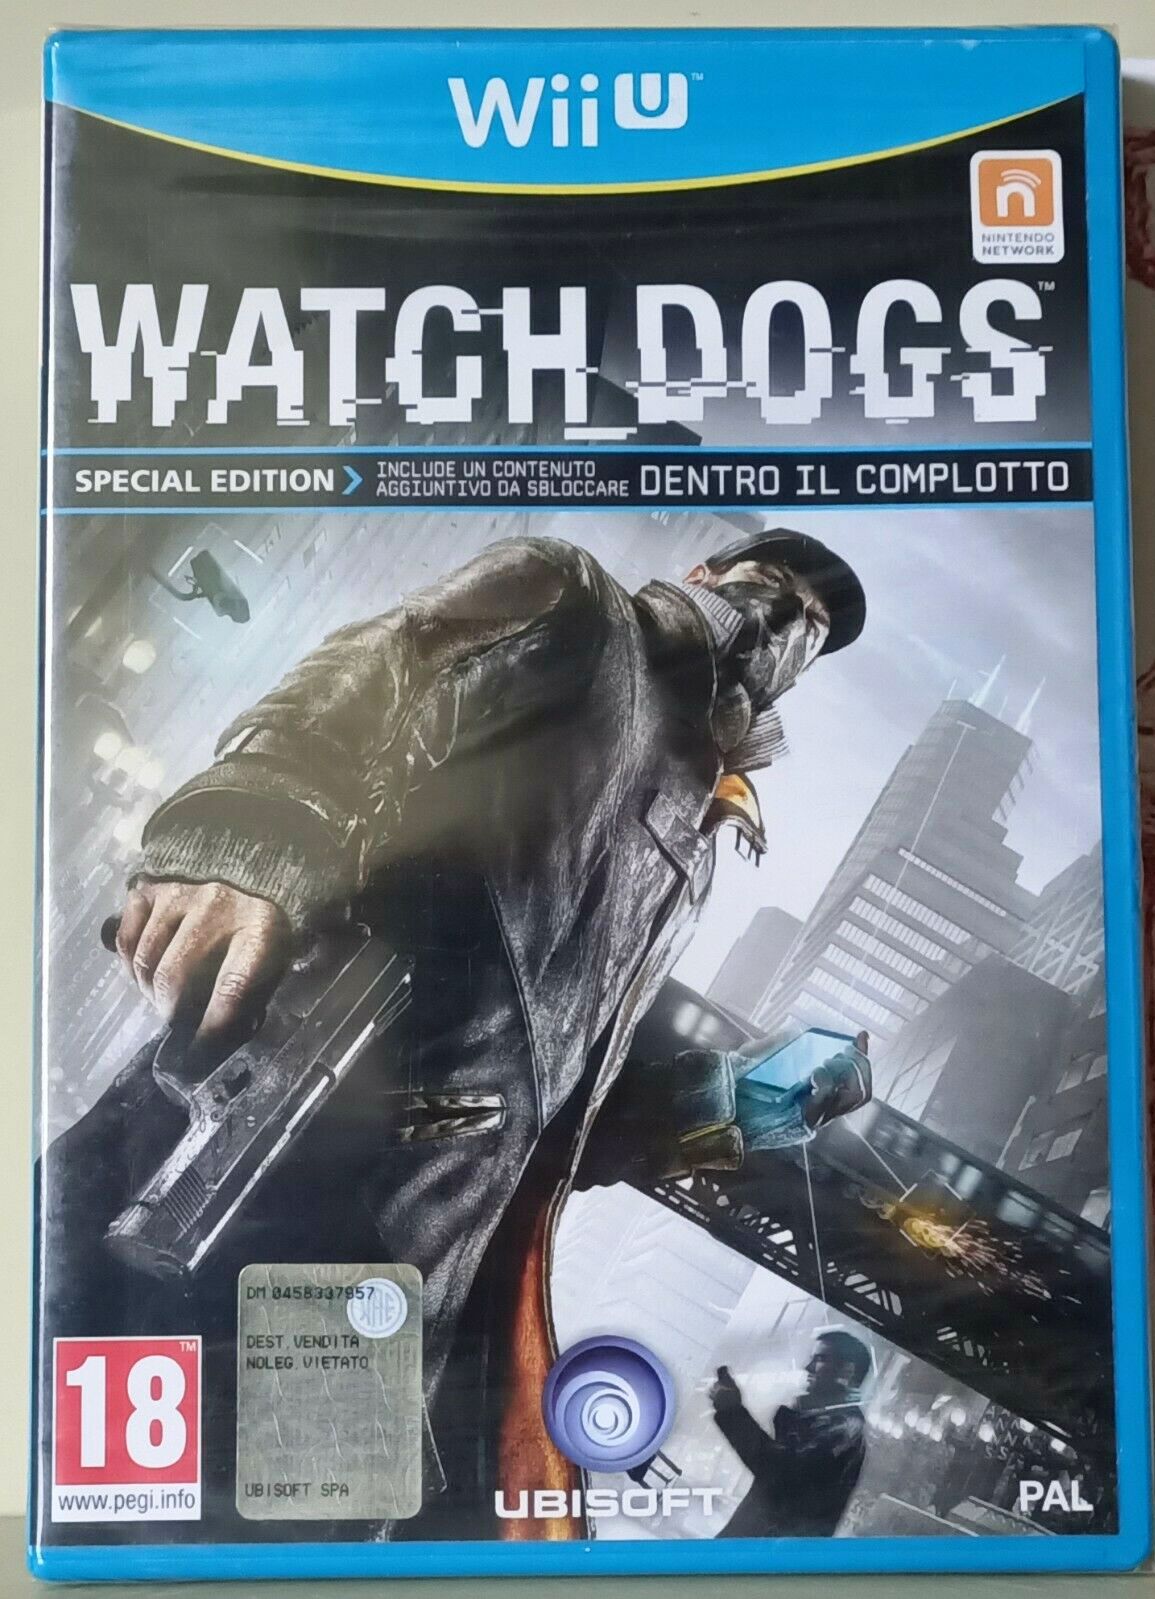 WATCH DOGS NUOVO